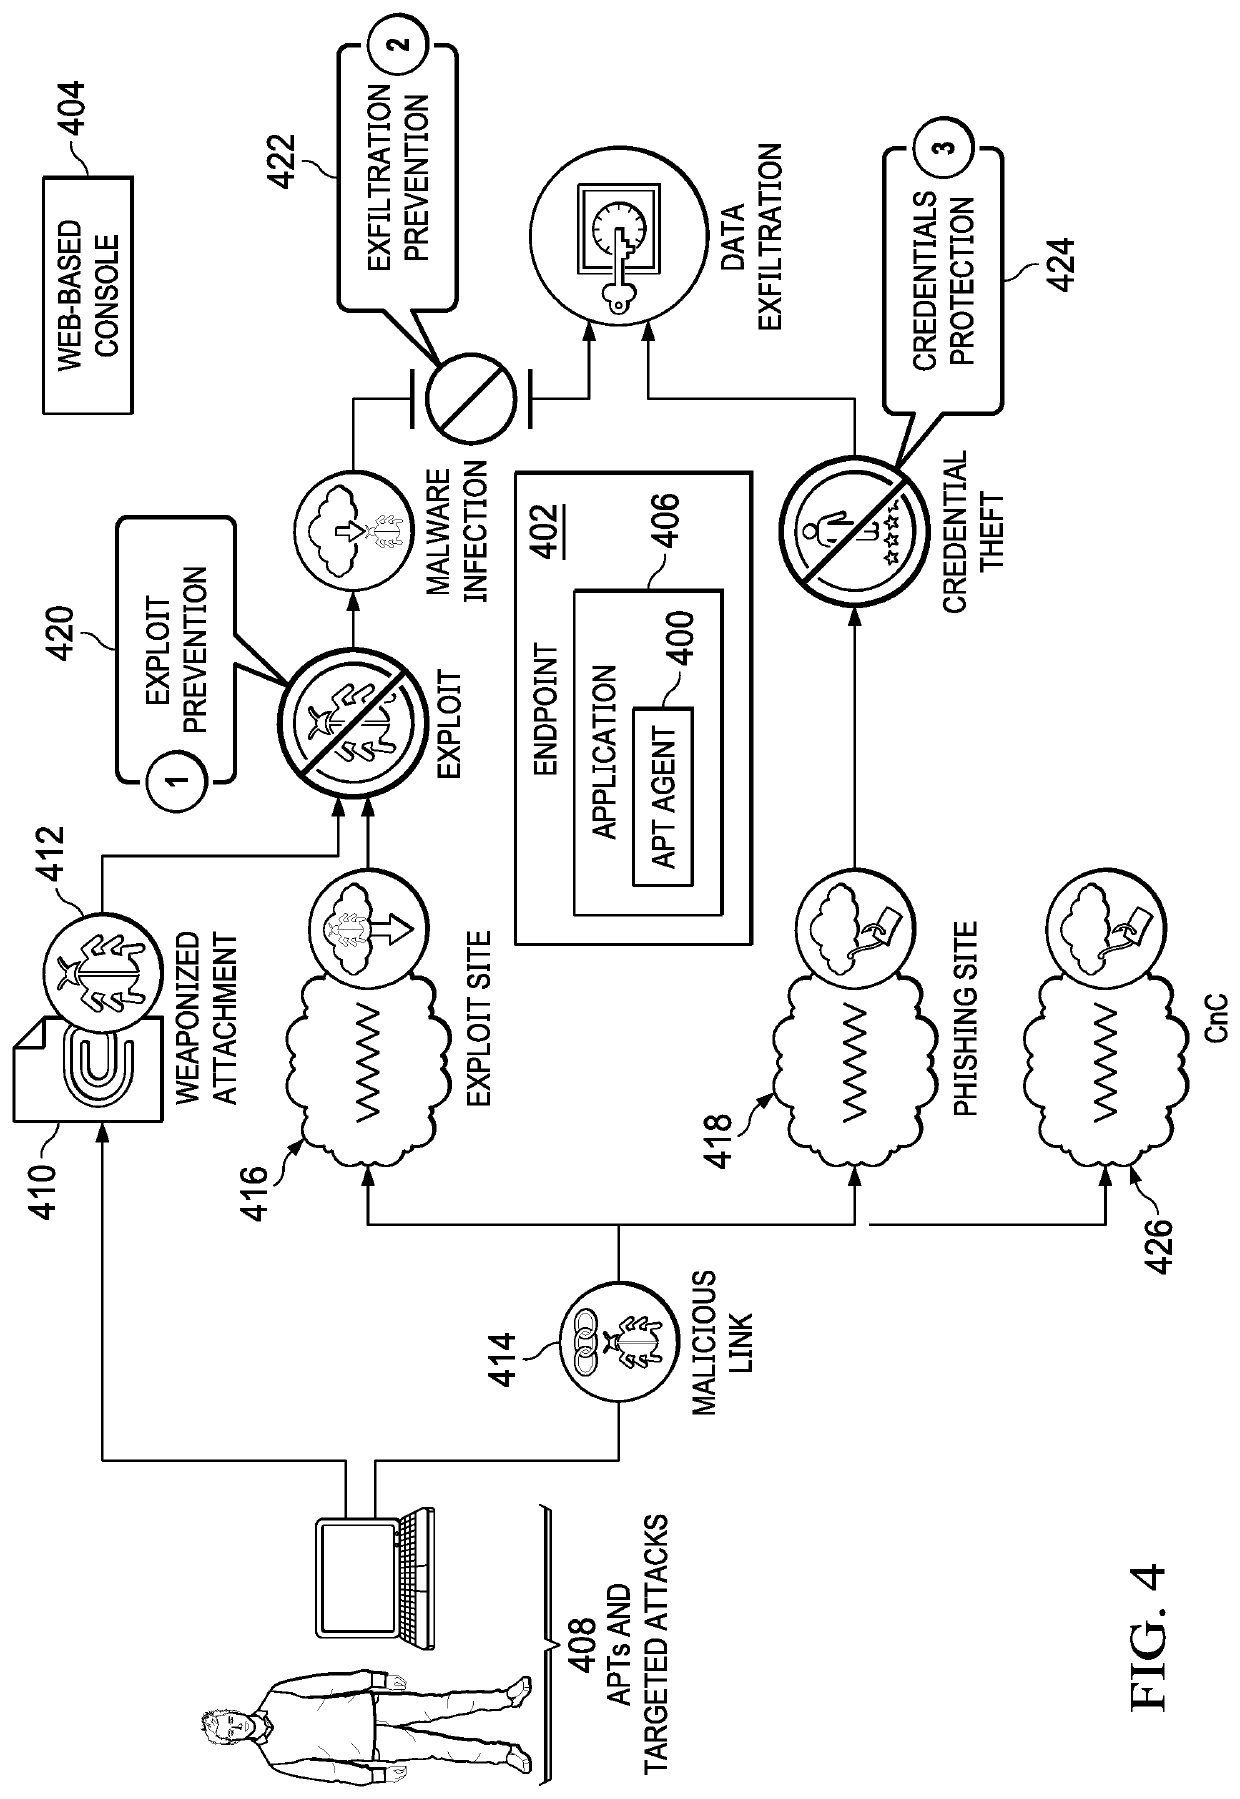 Endpoint inter-process activity extraction and pattern matching